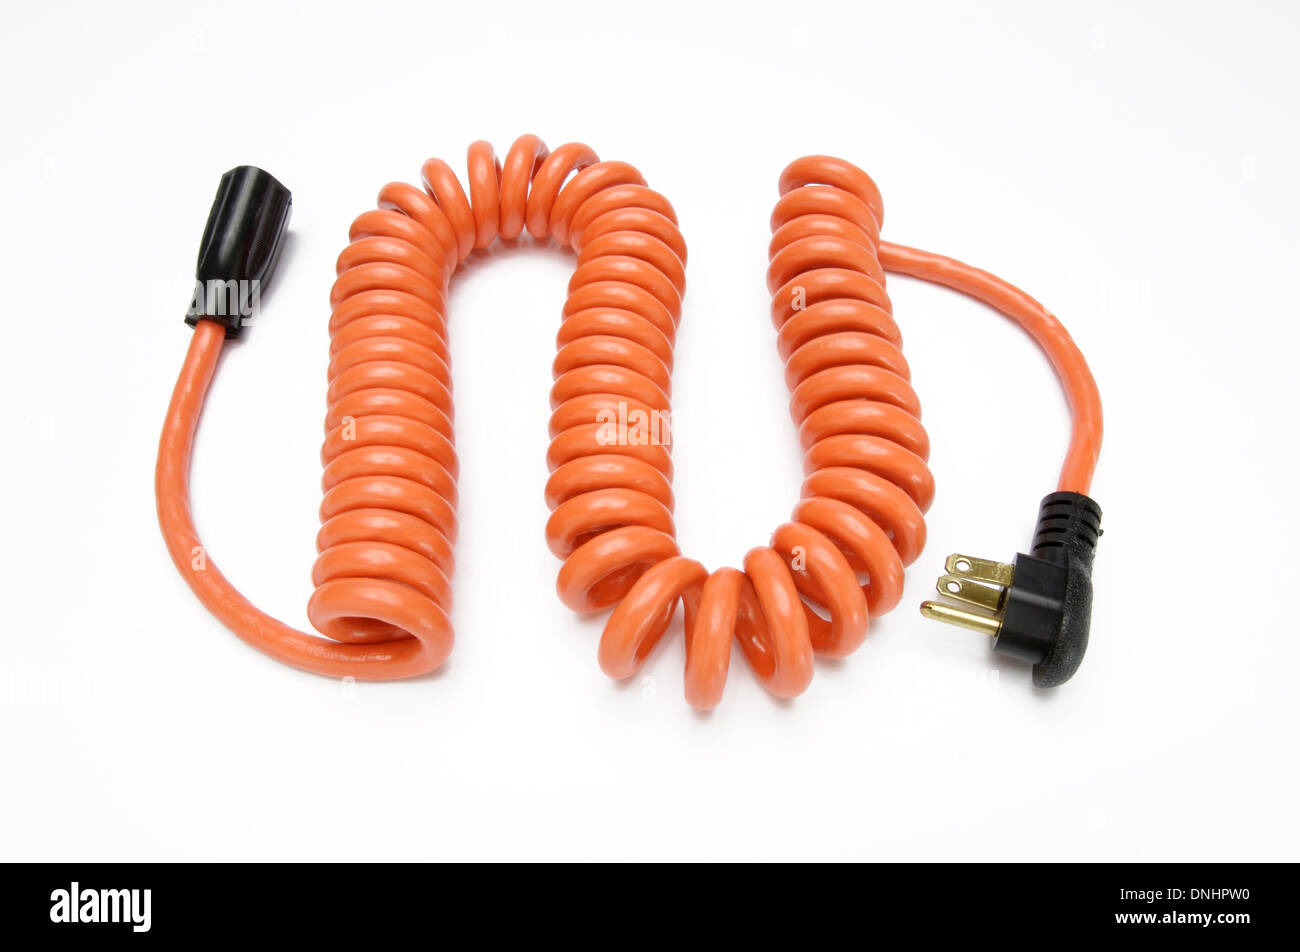 An orange coiled electrical power cord on a white background. Stock Photo